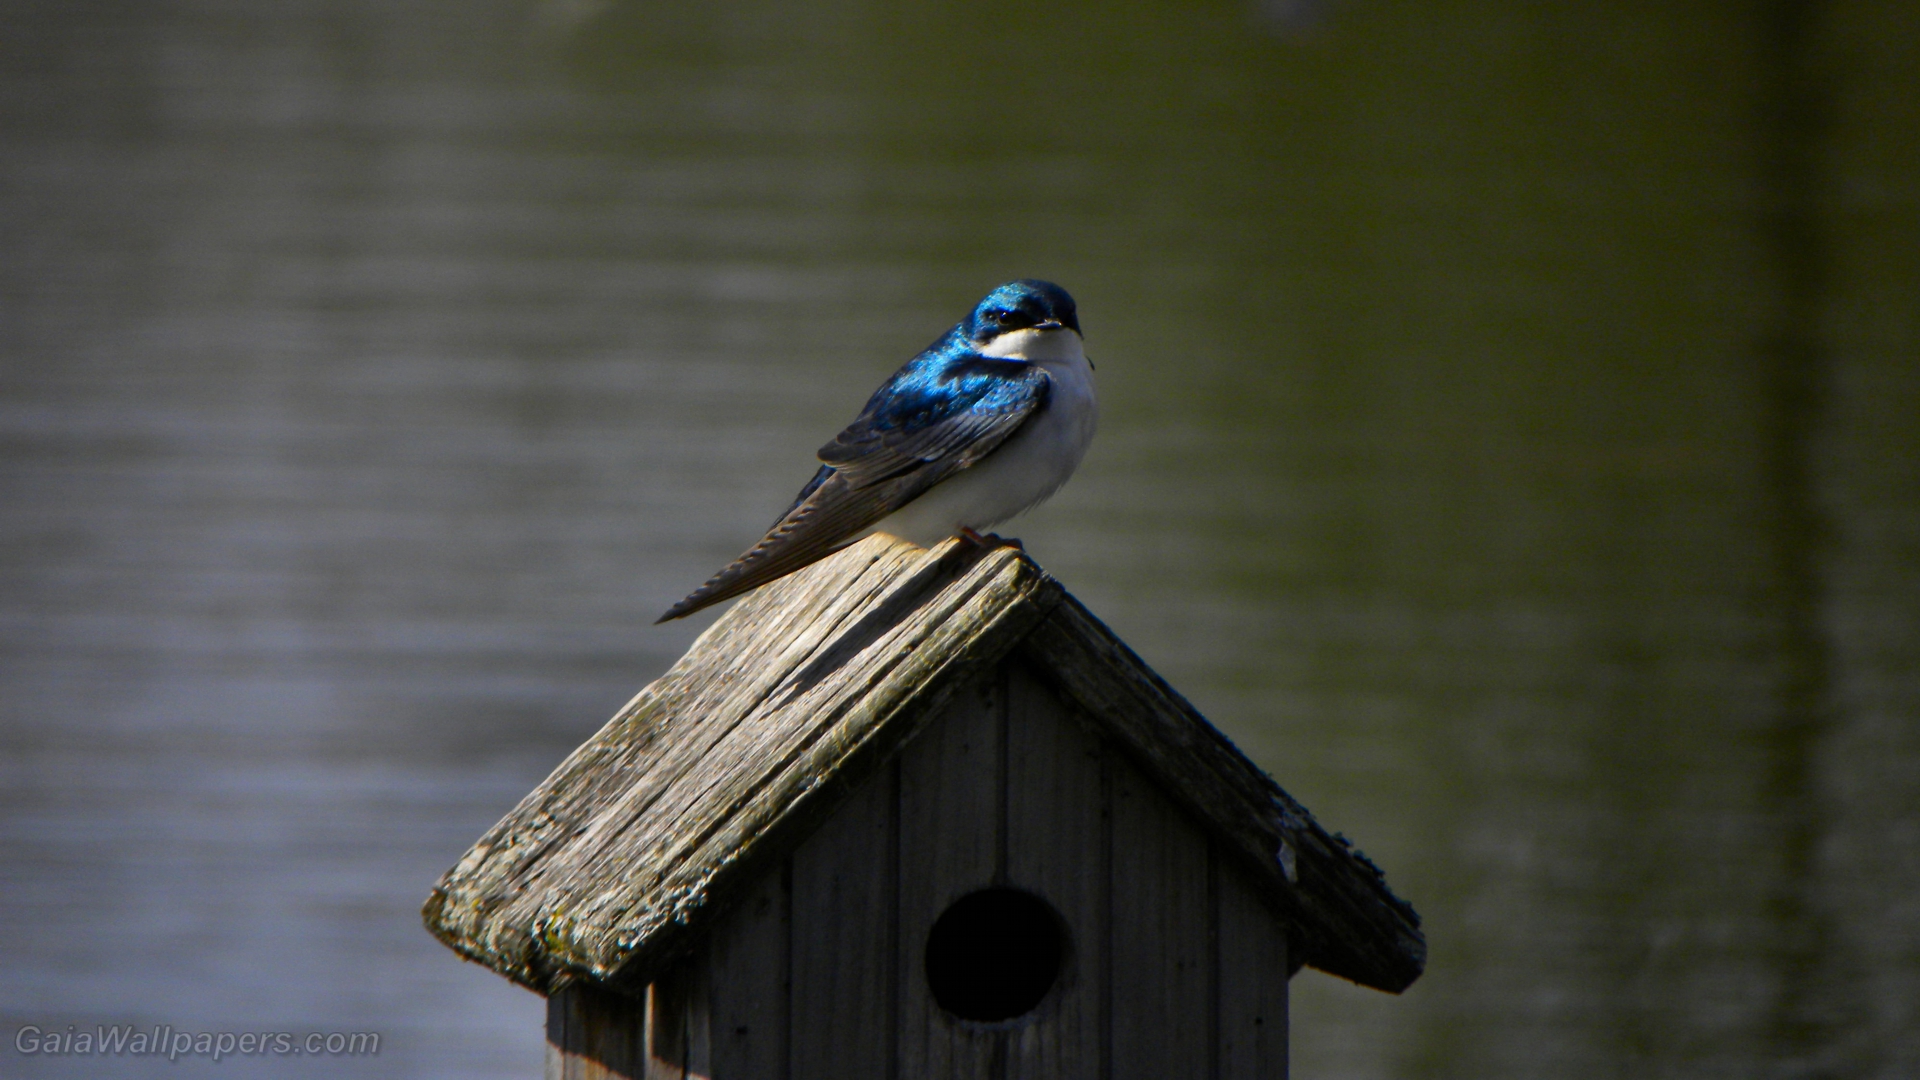 Tree Swallow perched on a birdhouse - Free desktop wallpapers